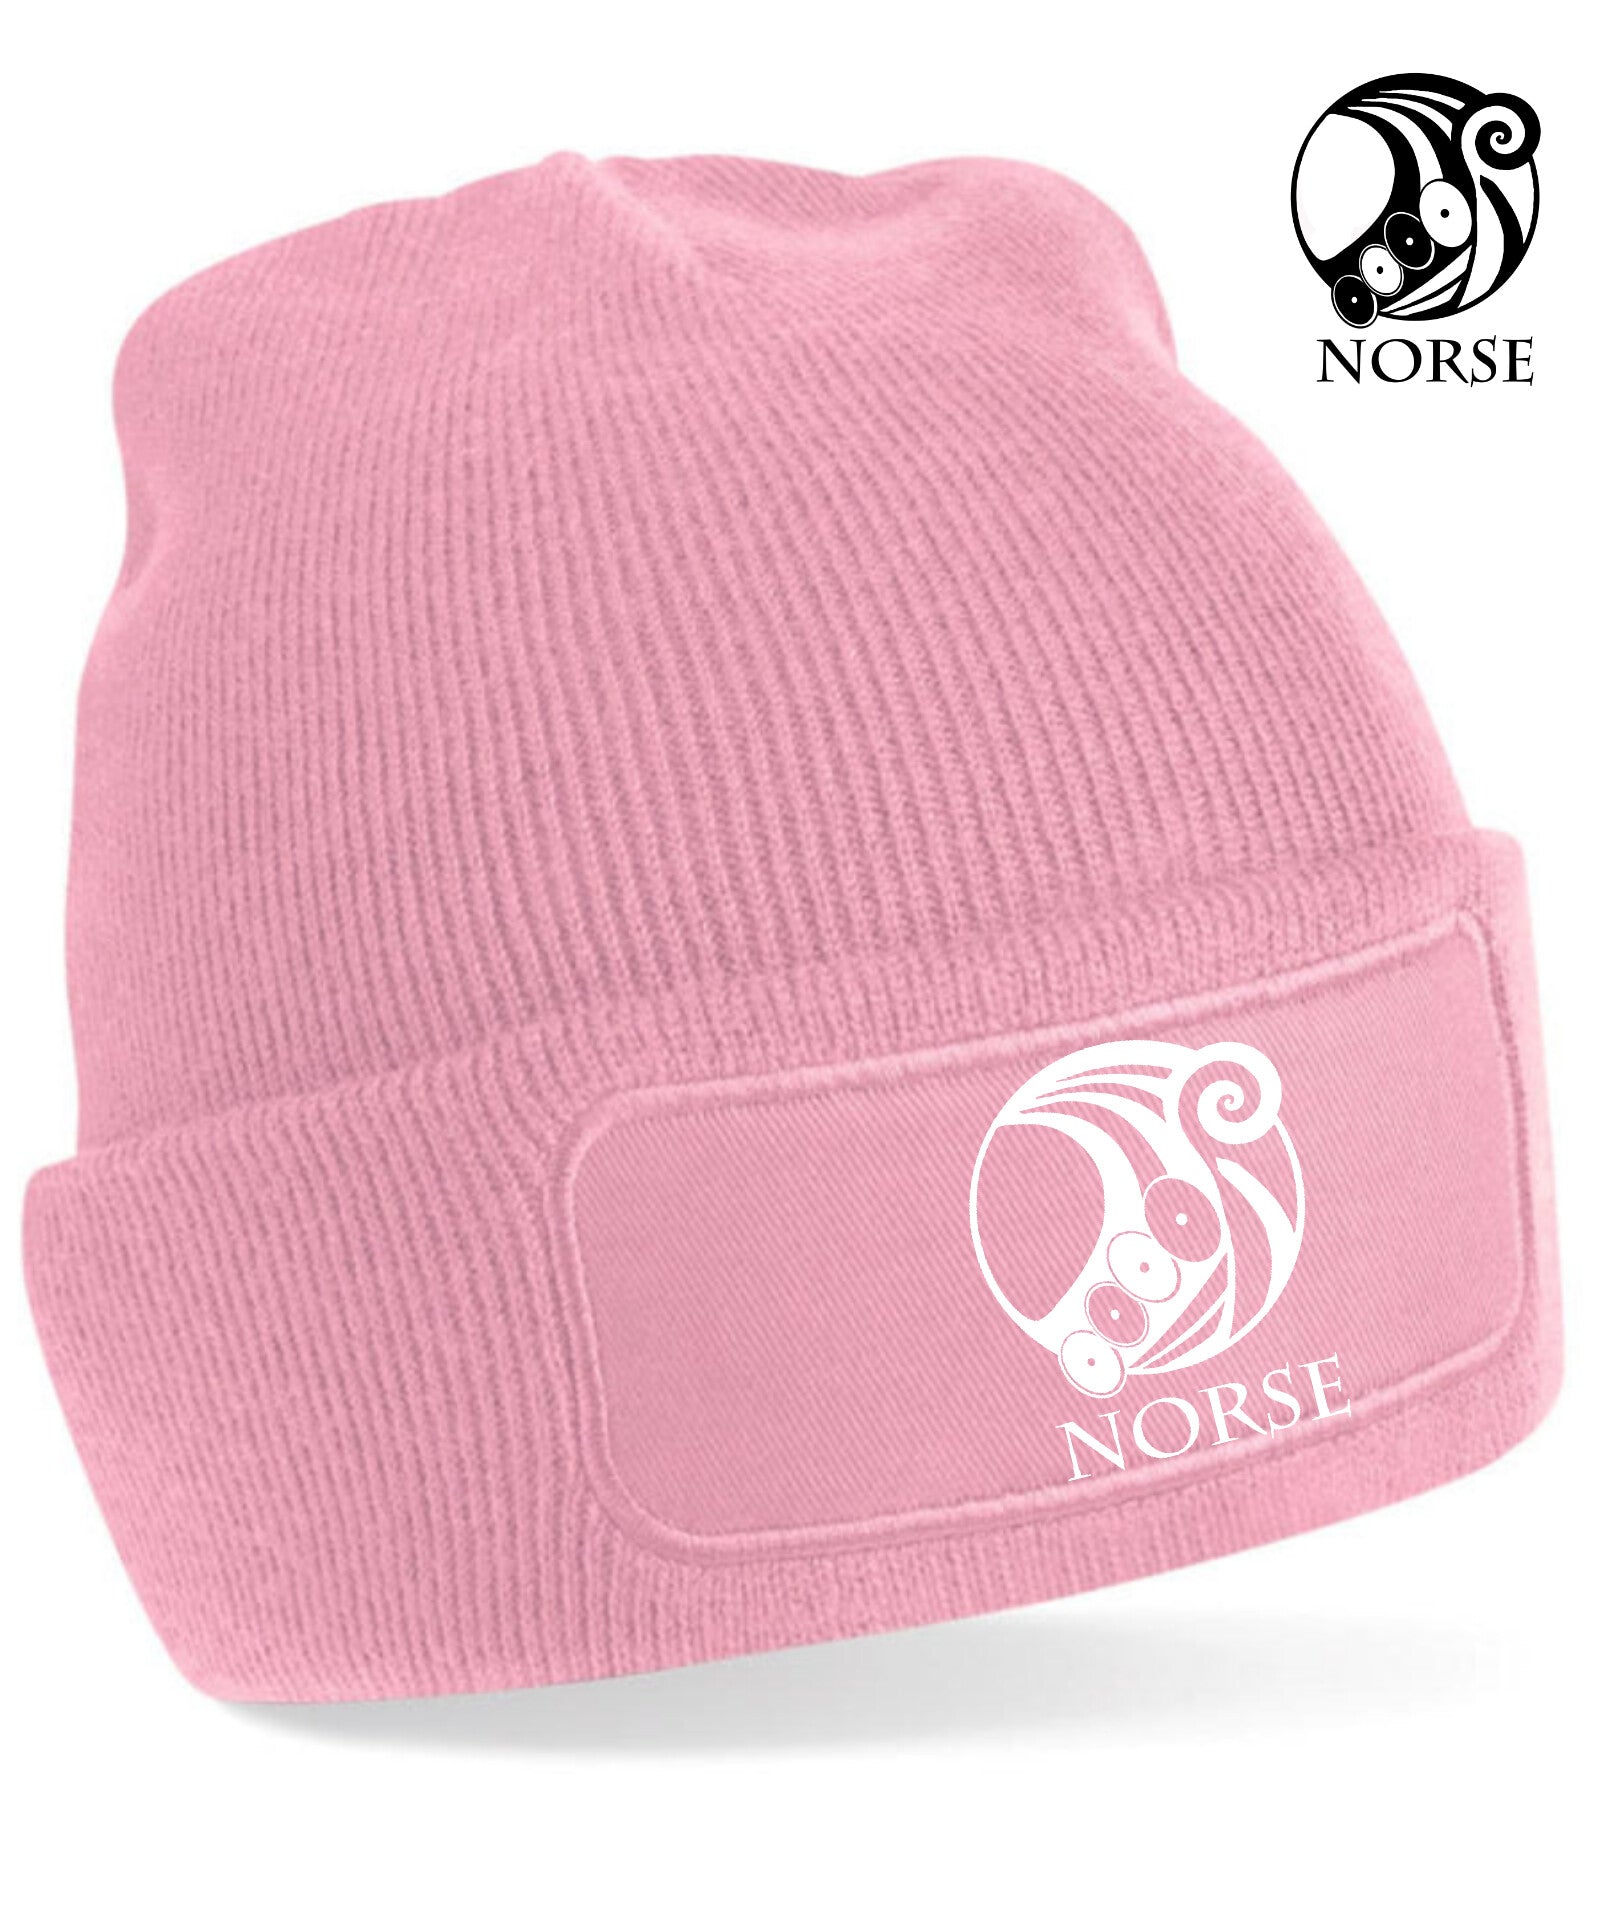 Norse Crest Beanie Dusty Pink